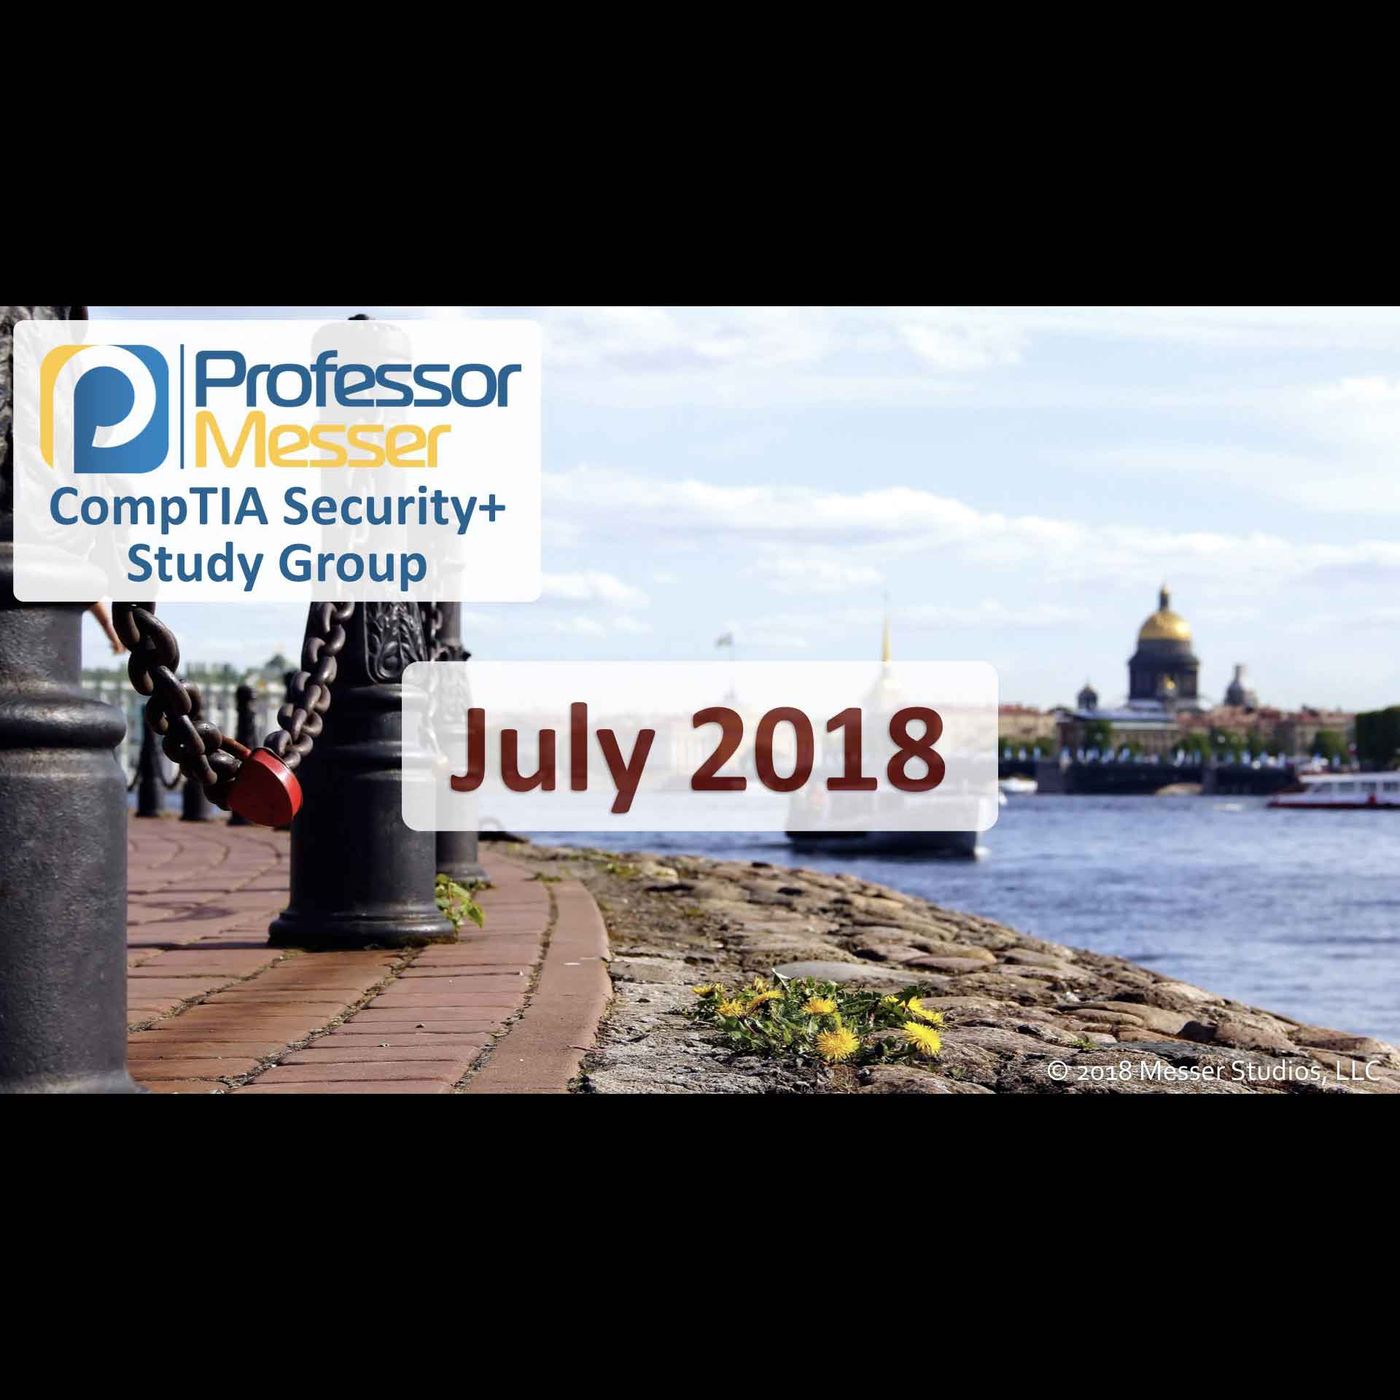 Professor Messer's Security+ Study Group - July 2018